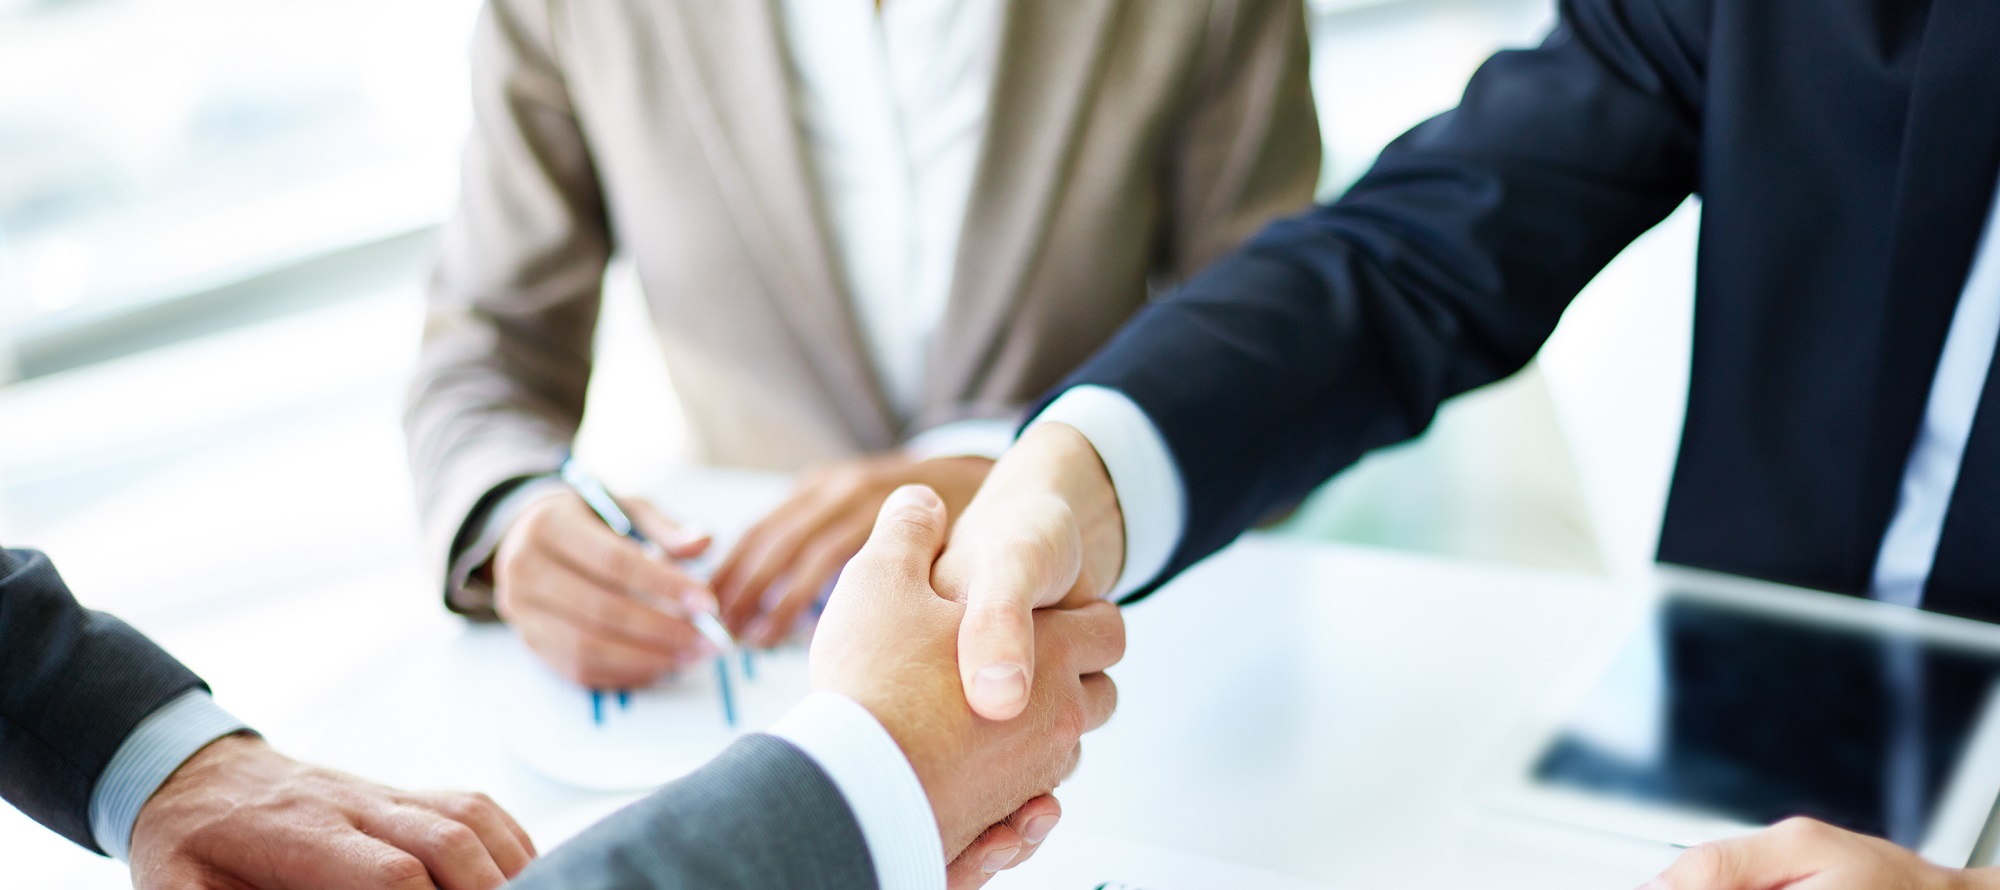 image-of-business-partners-handshaking-over-business-objects-on-workplace-min